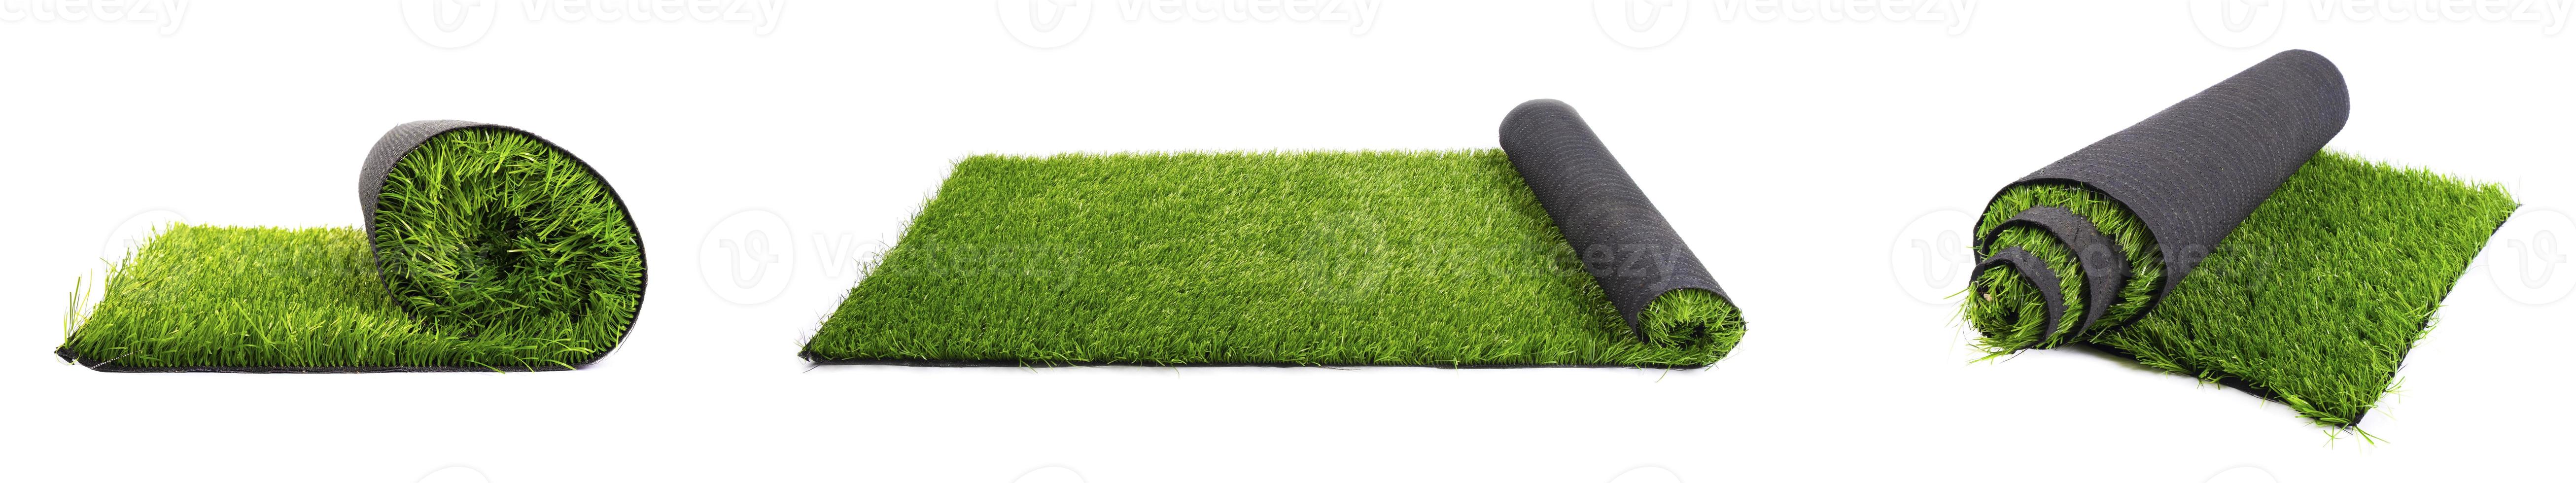 Rolls of artificial lawn panorama on a white background photo